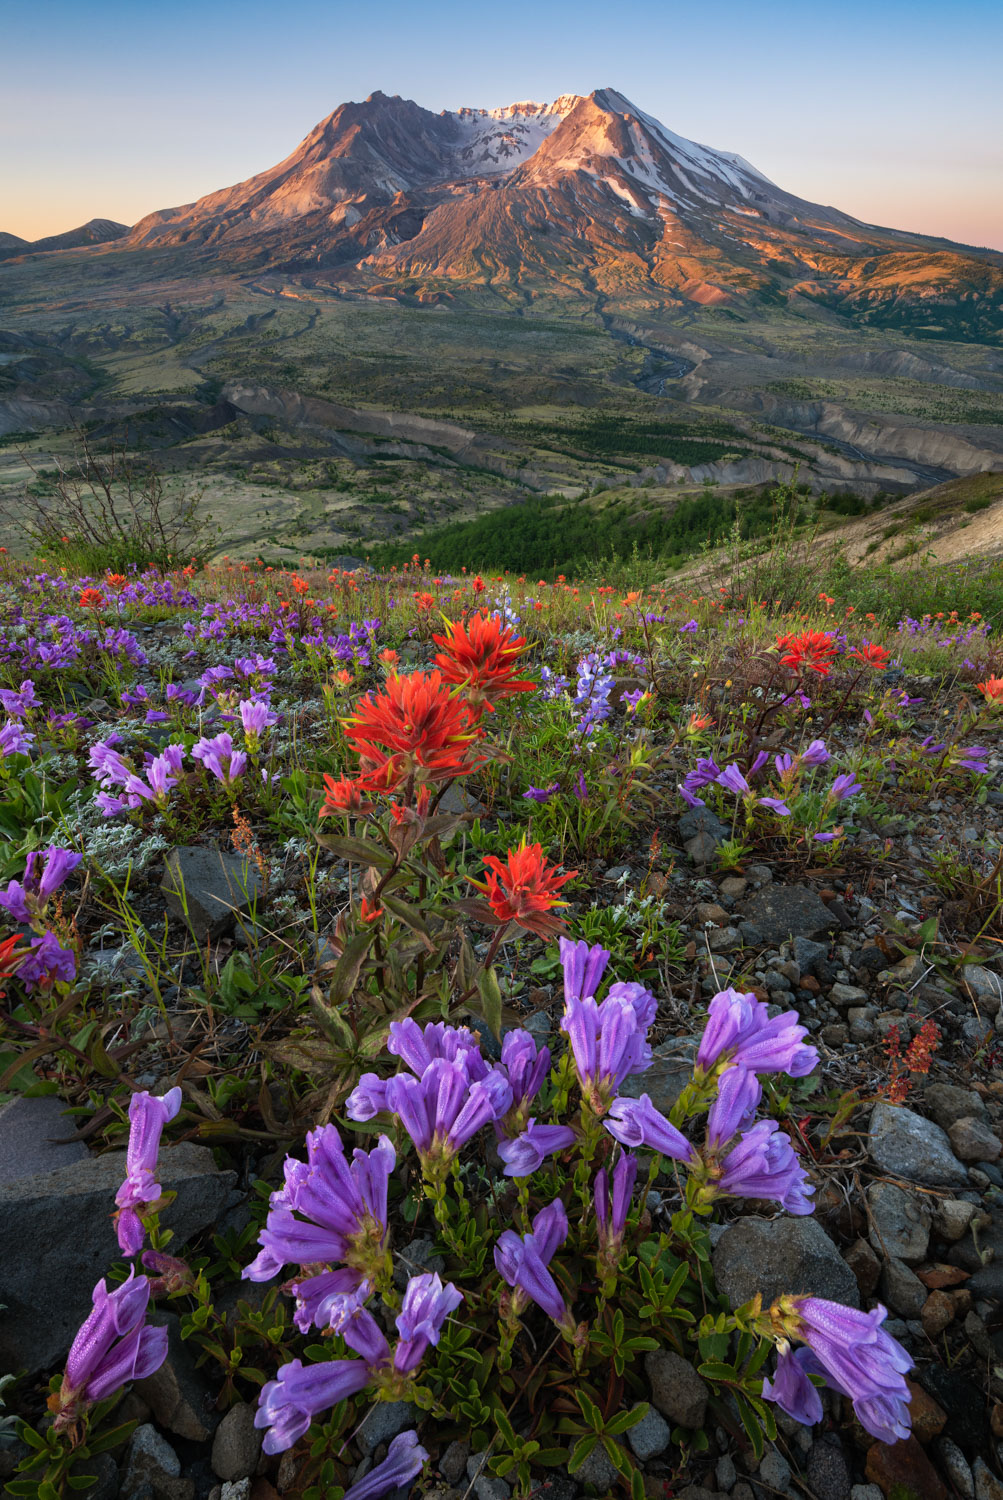 Indian paintbrush and purple penstemon wildflowers in front of Mount St. Helens in springtime.